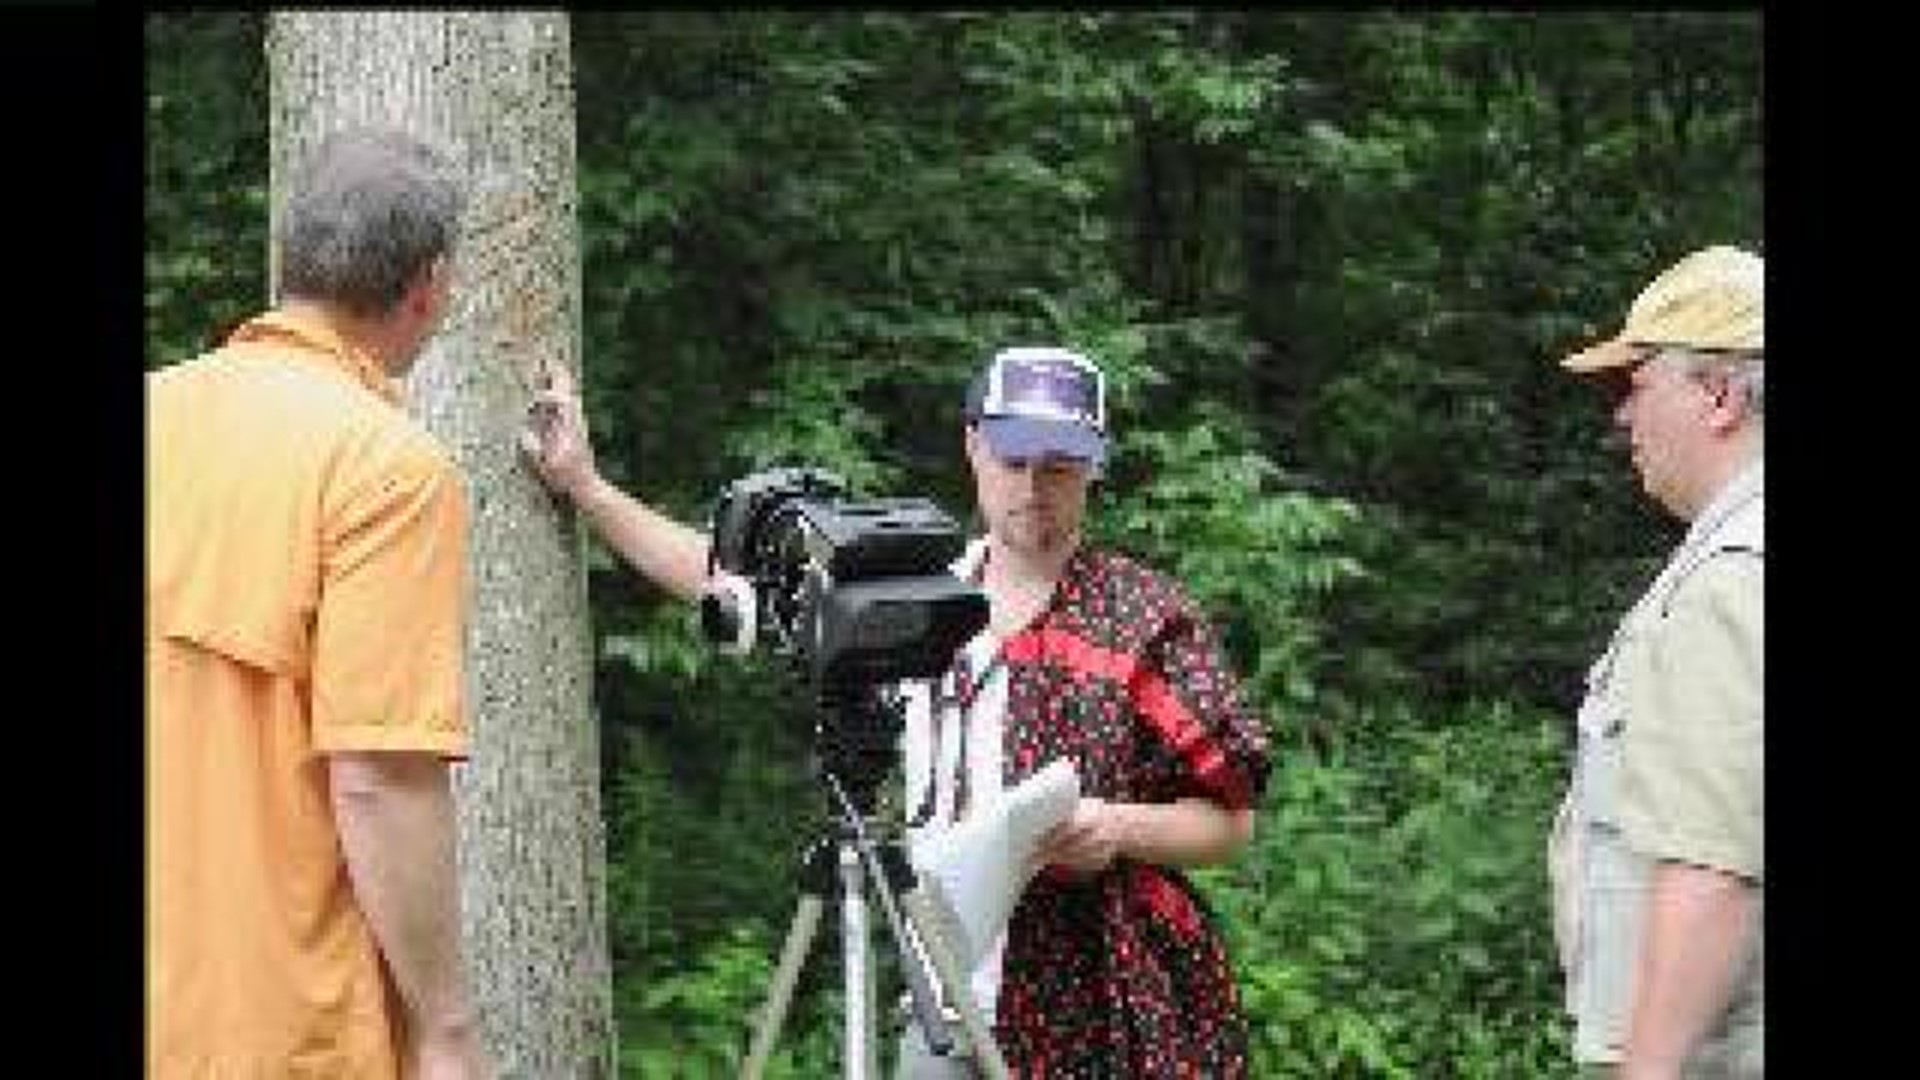 Independent filmmaker in the Quad Cities